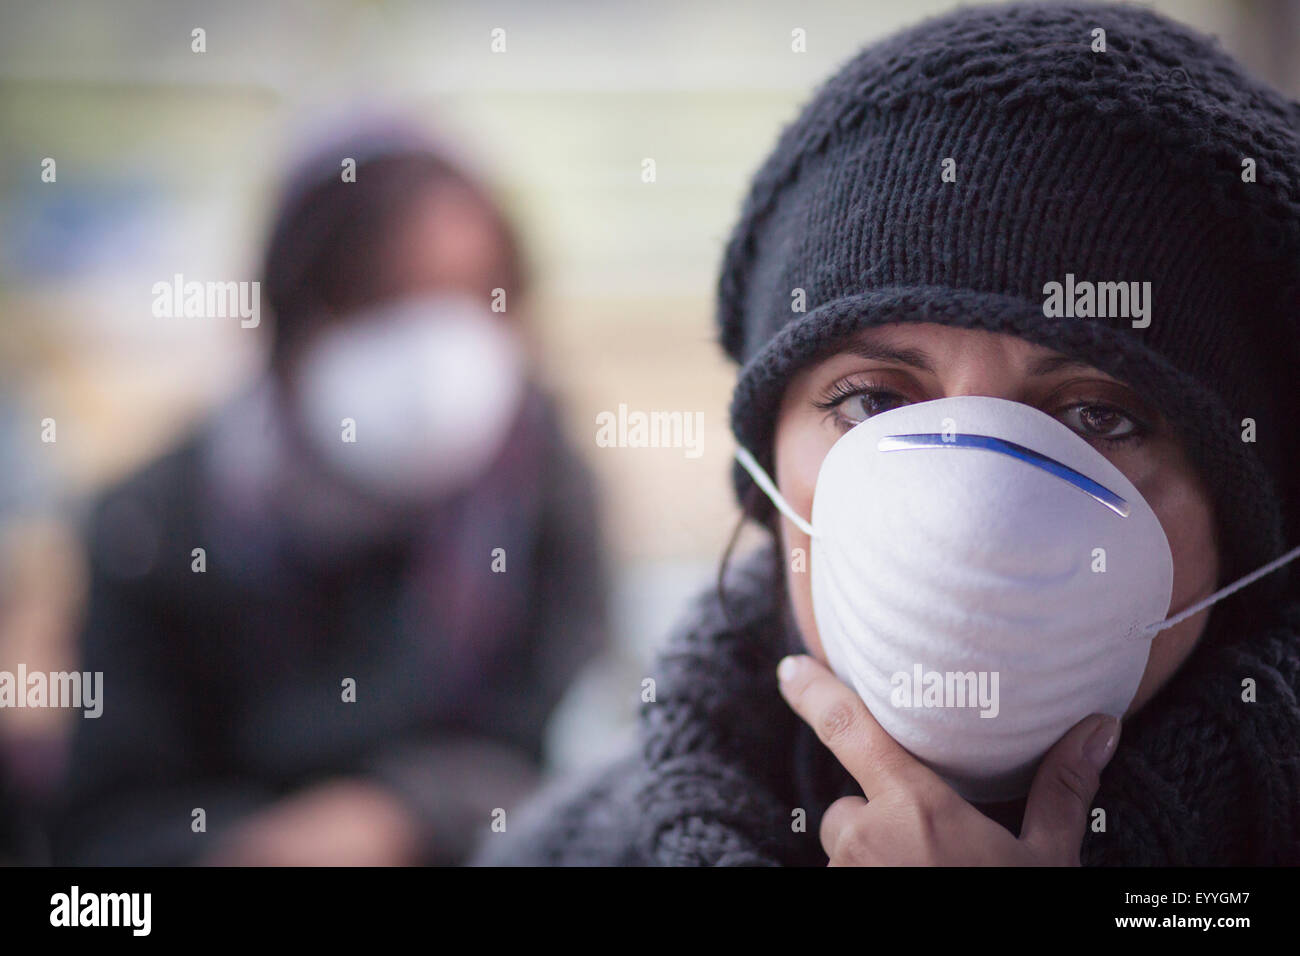 Caucasian woman wearing protective breathing mask Stock Photo